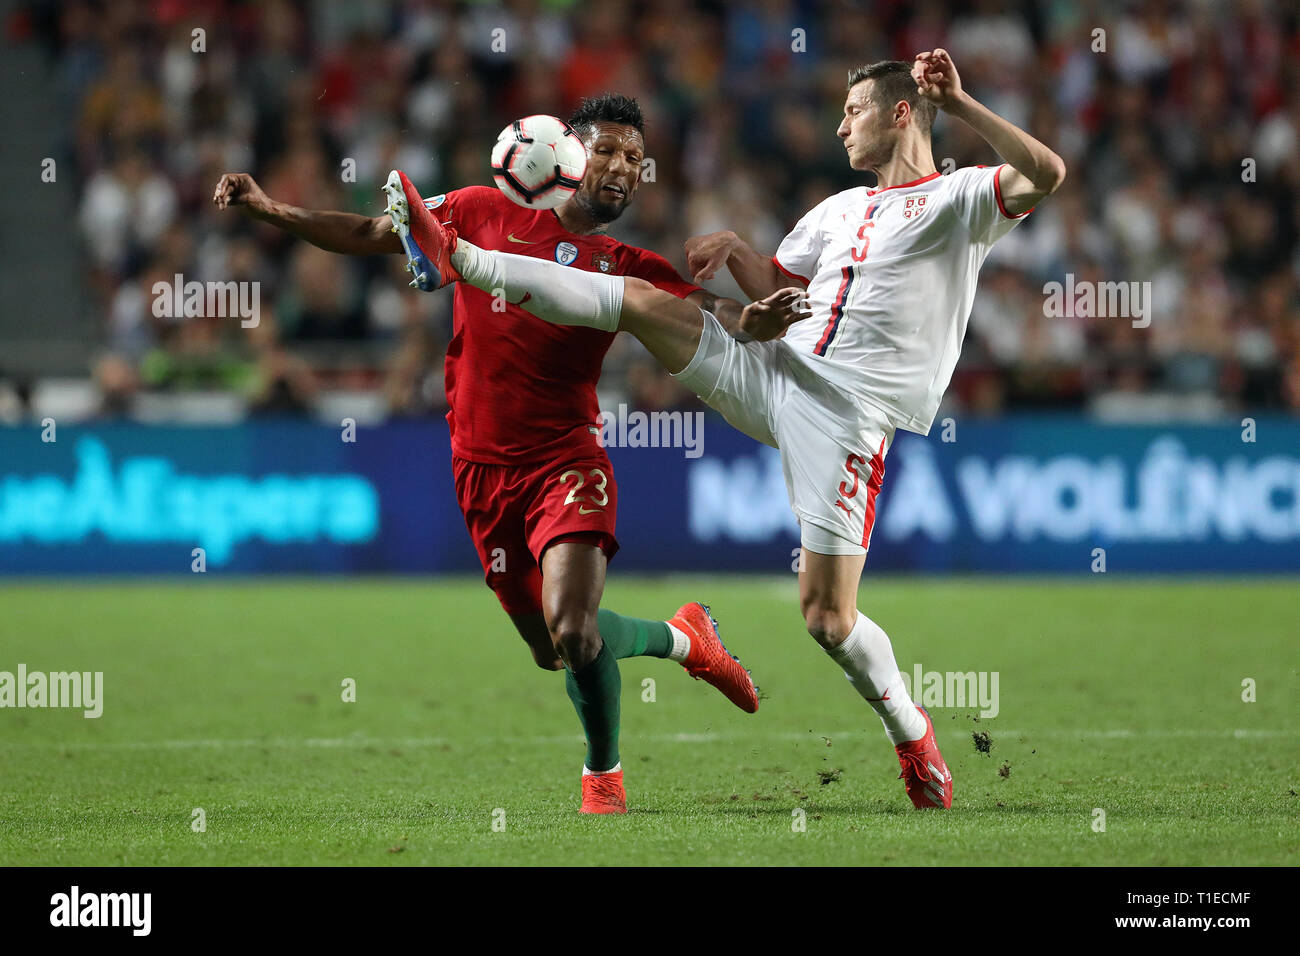 Dyego Sousa of Portugal (L) vies for the ball with Uros Spajic of Serbia (R) during the Qualifiers - Group B to Euro 2020 football match between Portugal vs Serbia. (Final score: Portugal 1 - 1 Serbia) Stock Photo